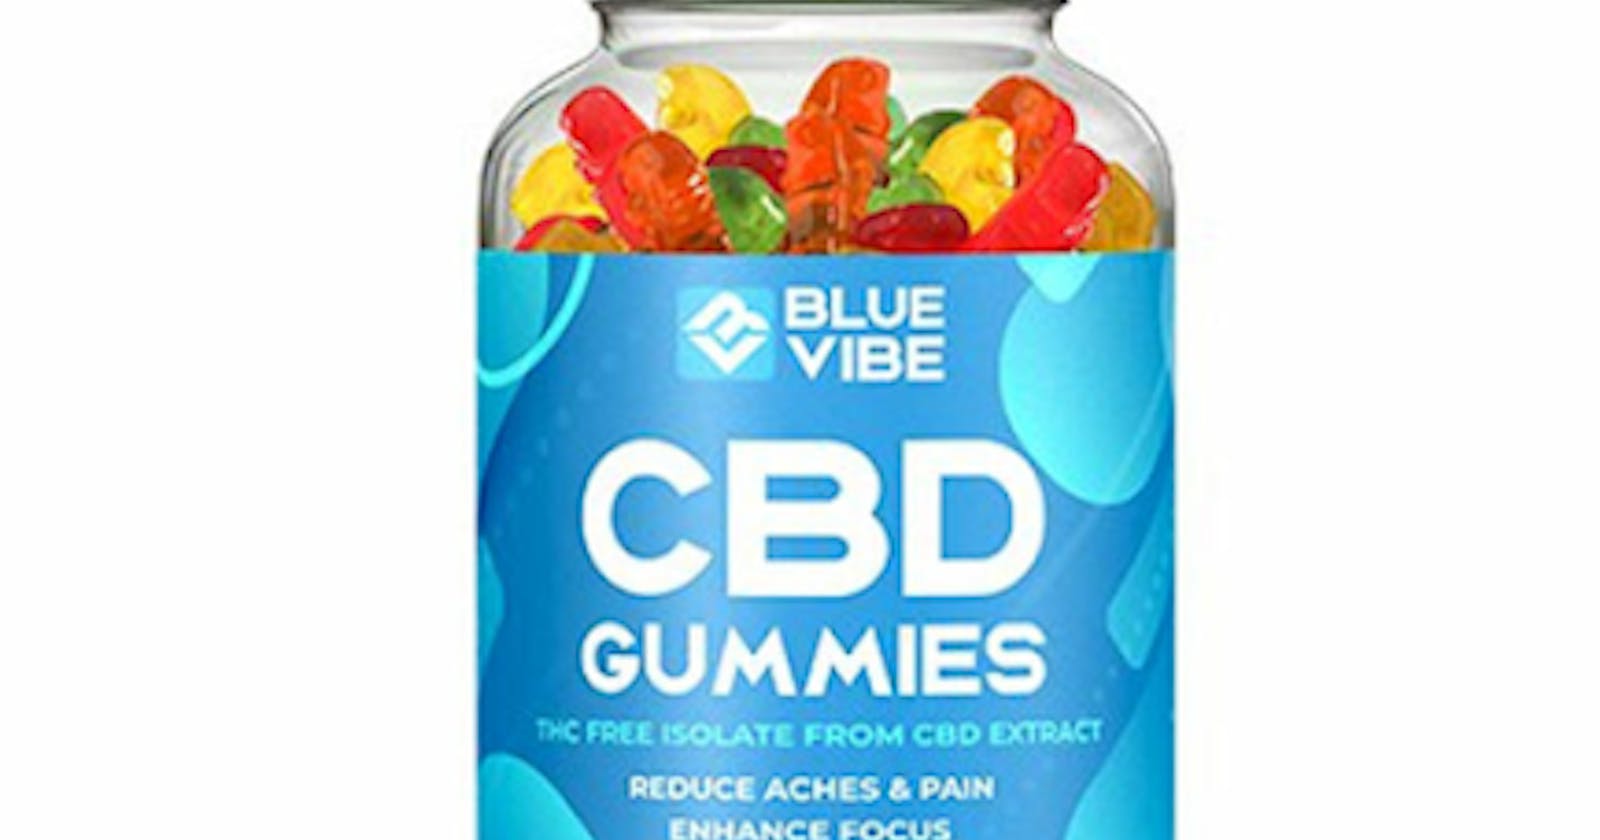 Blue Vibe CBD Gummies 2024″ Pain Relief, Side Effects, Best Results